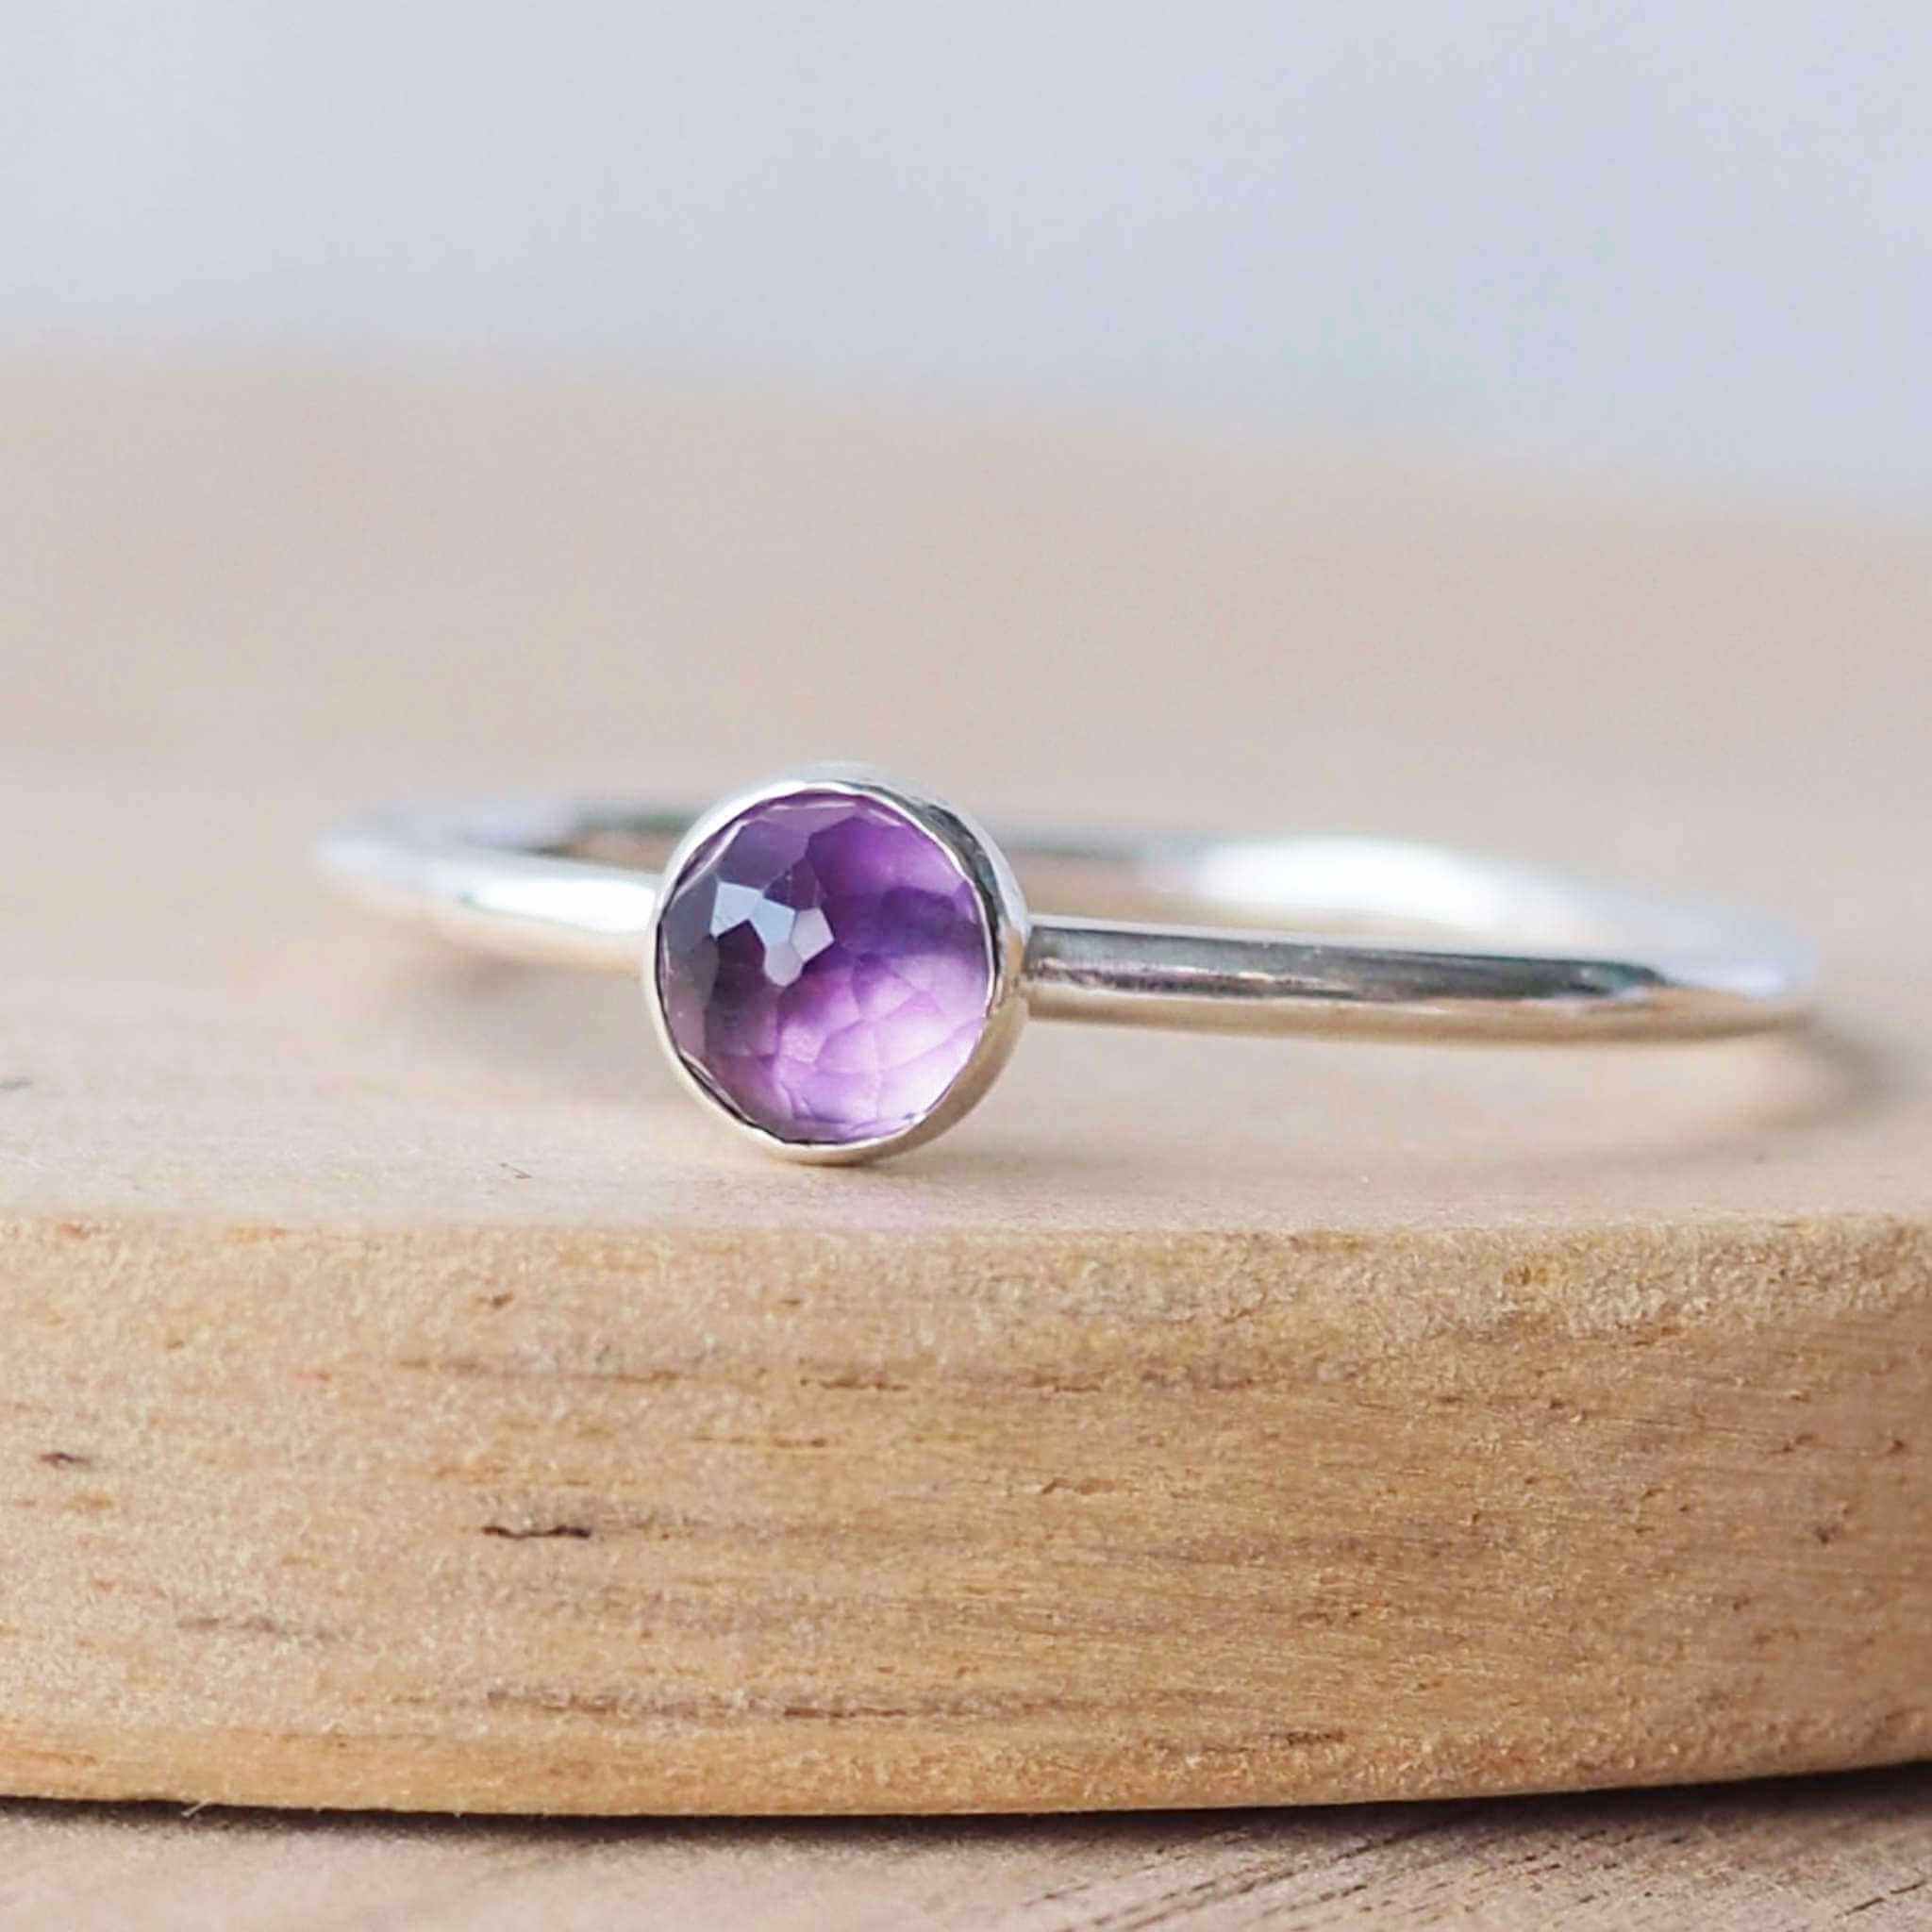 Get 925 Sterling Silver Ring with African Amethyst at ₹ 1379 | LBB Shop